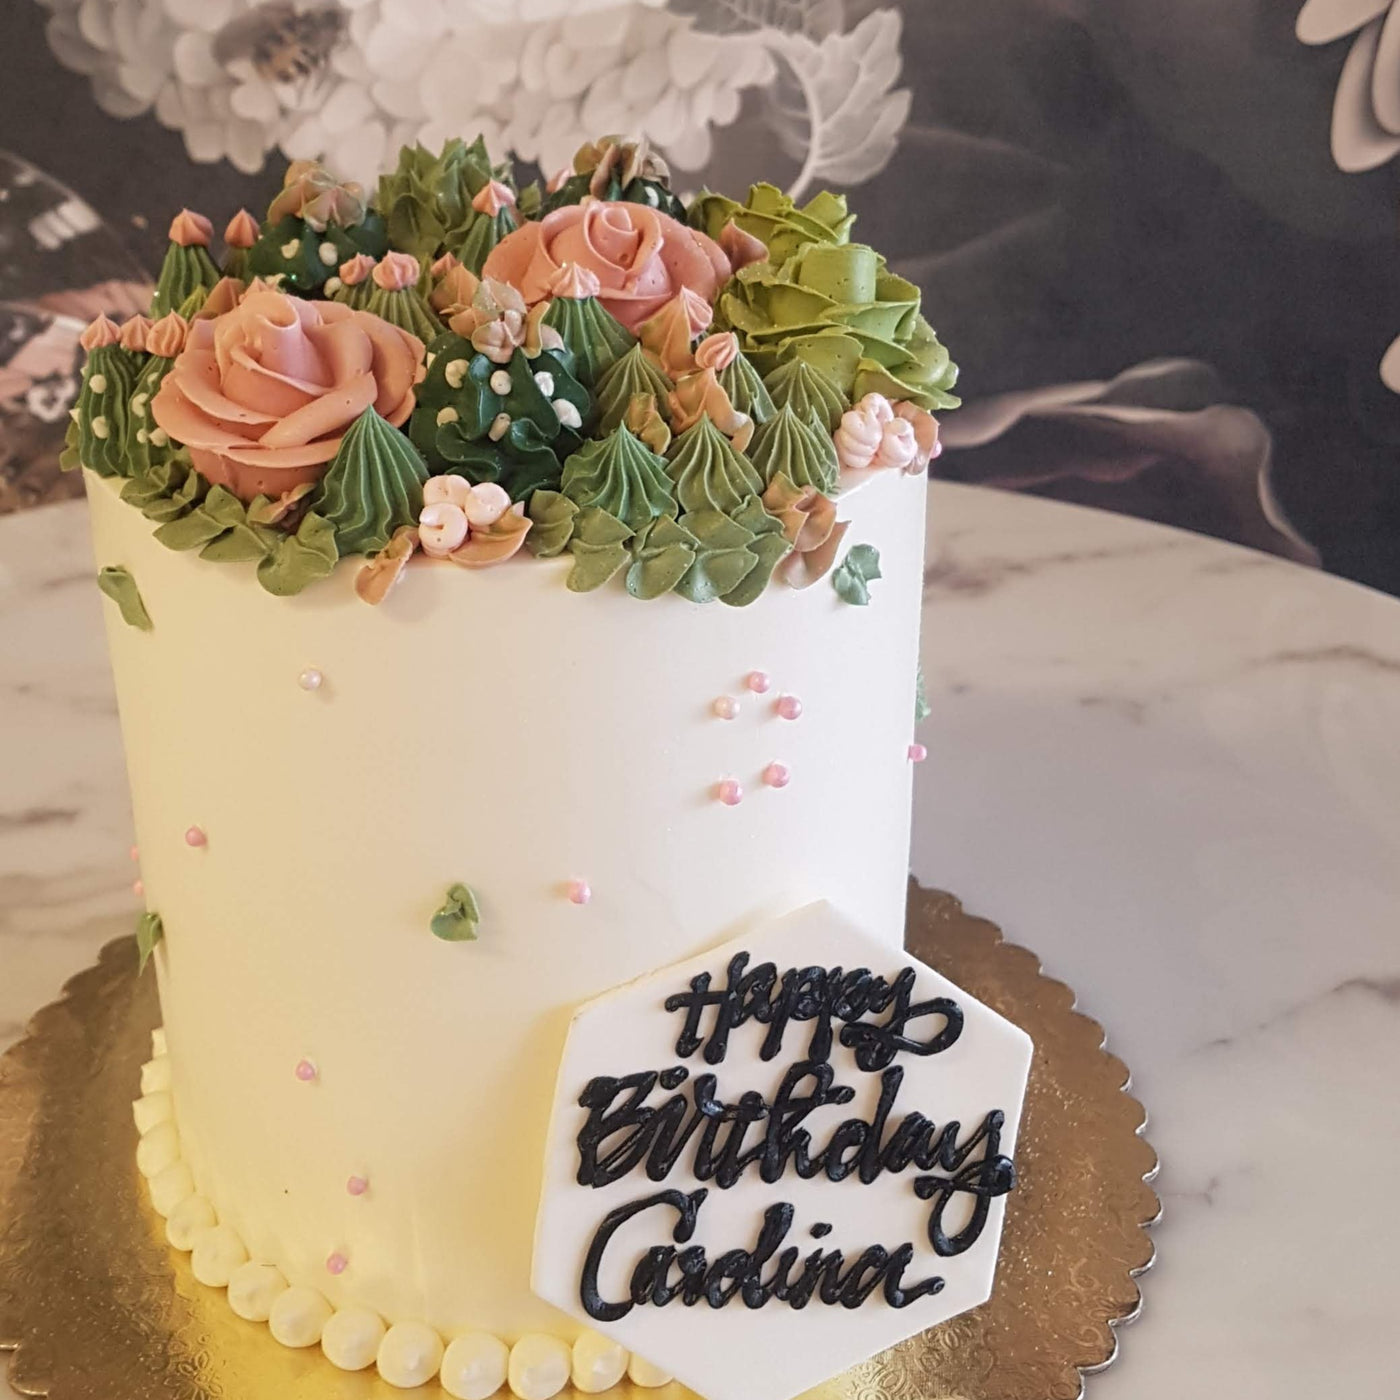 Succulents and Roses Cake | Cactus Boho Themed Cake | Rustic Desert